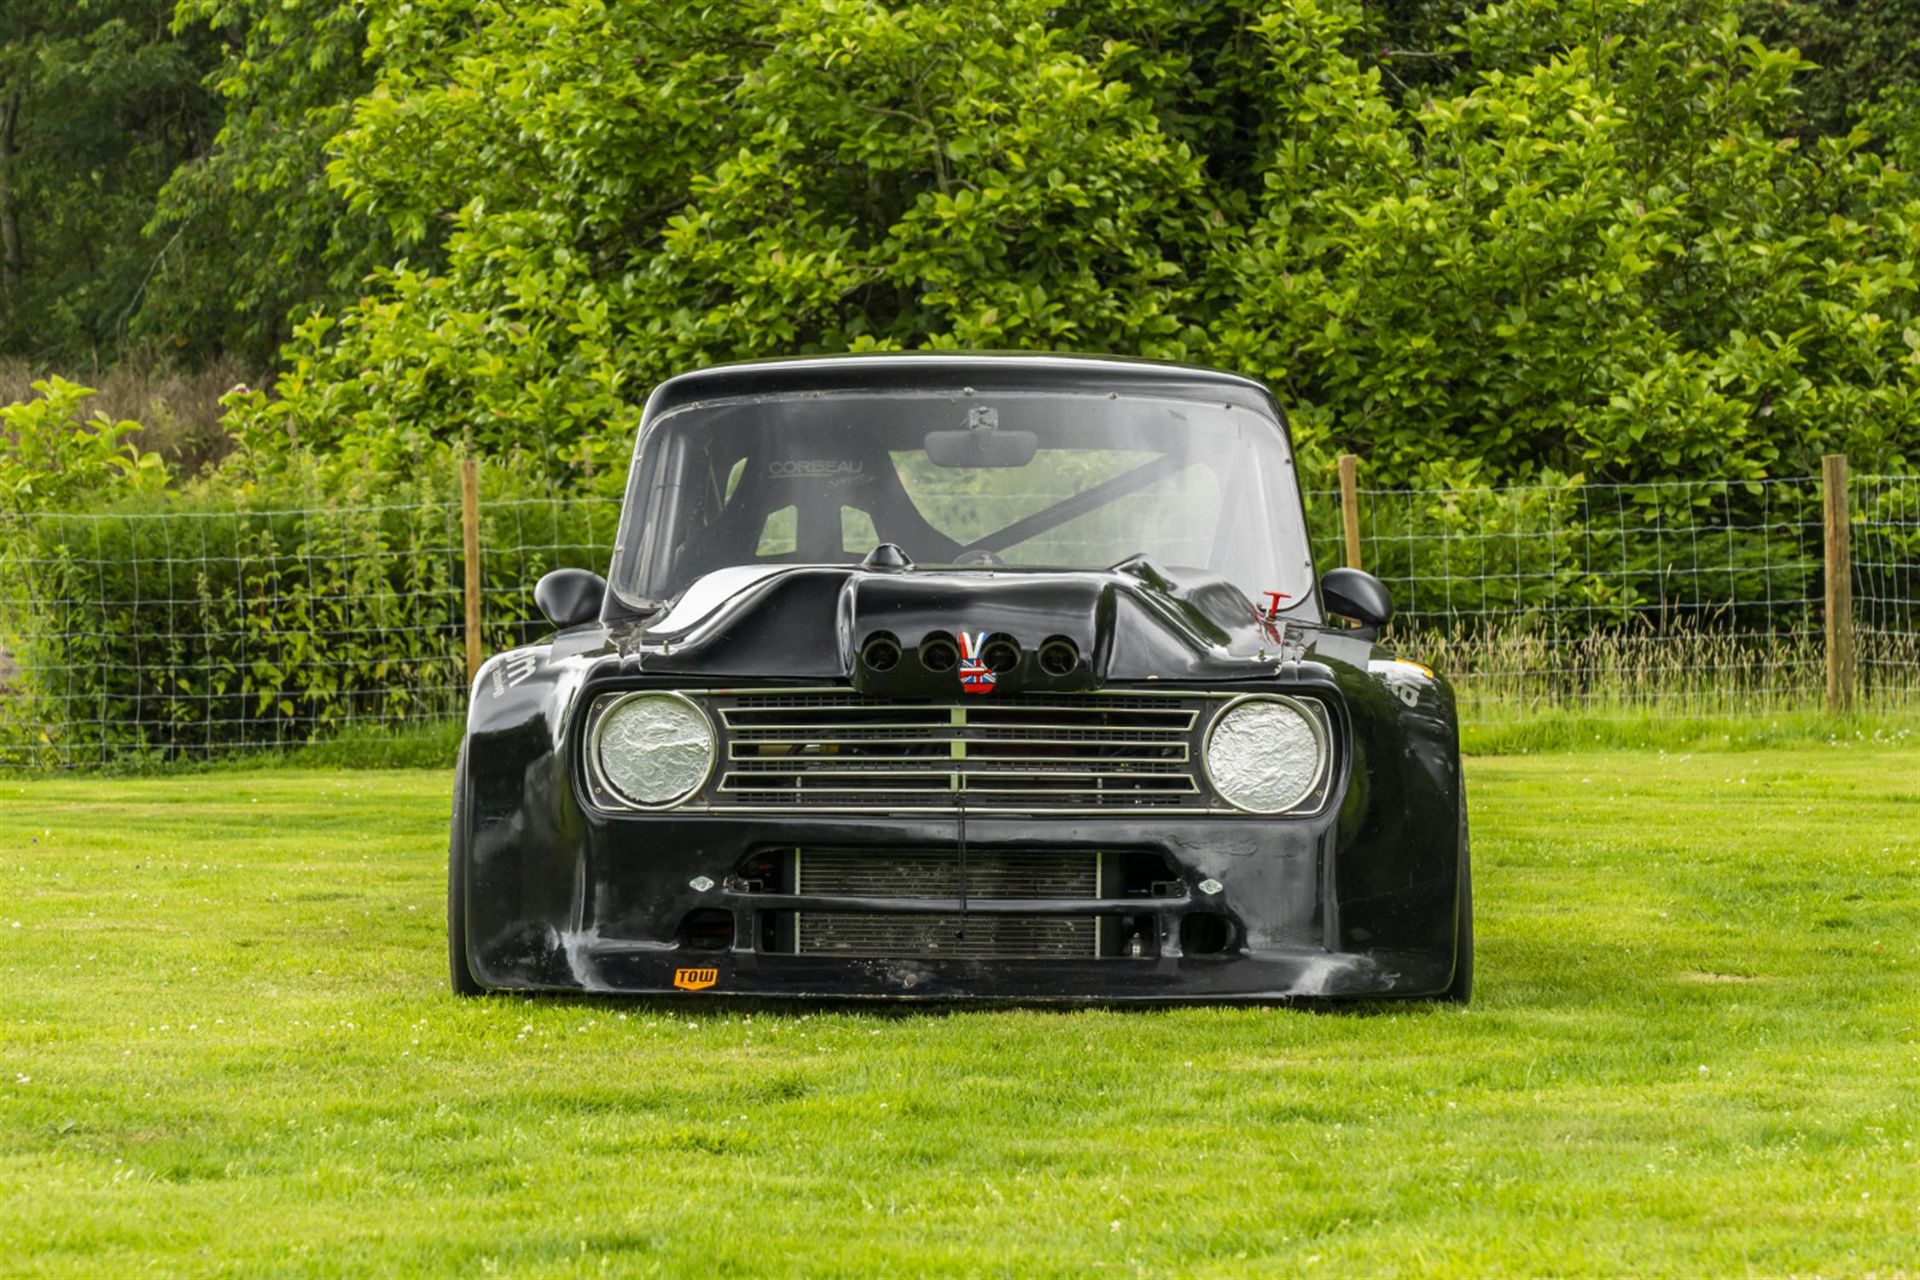 1979 Maguire Mini Twin-Cam TS.79.DH - Image 6 of 10